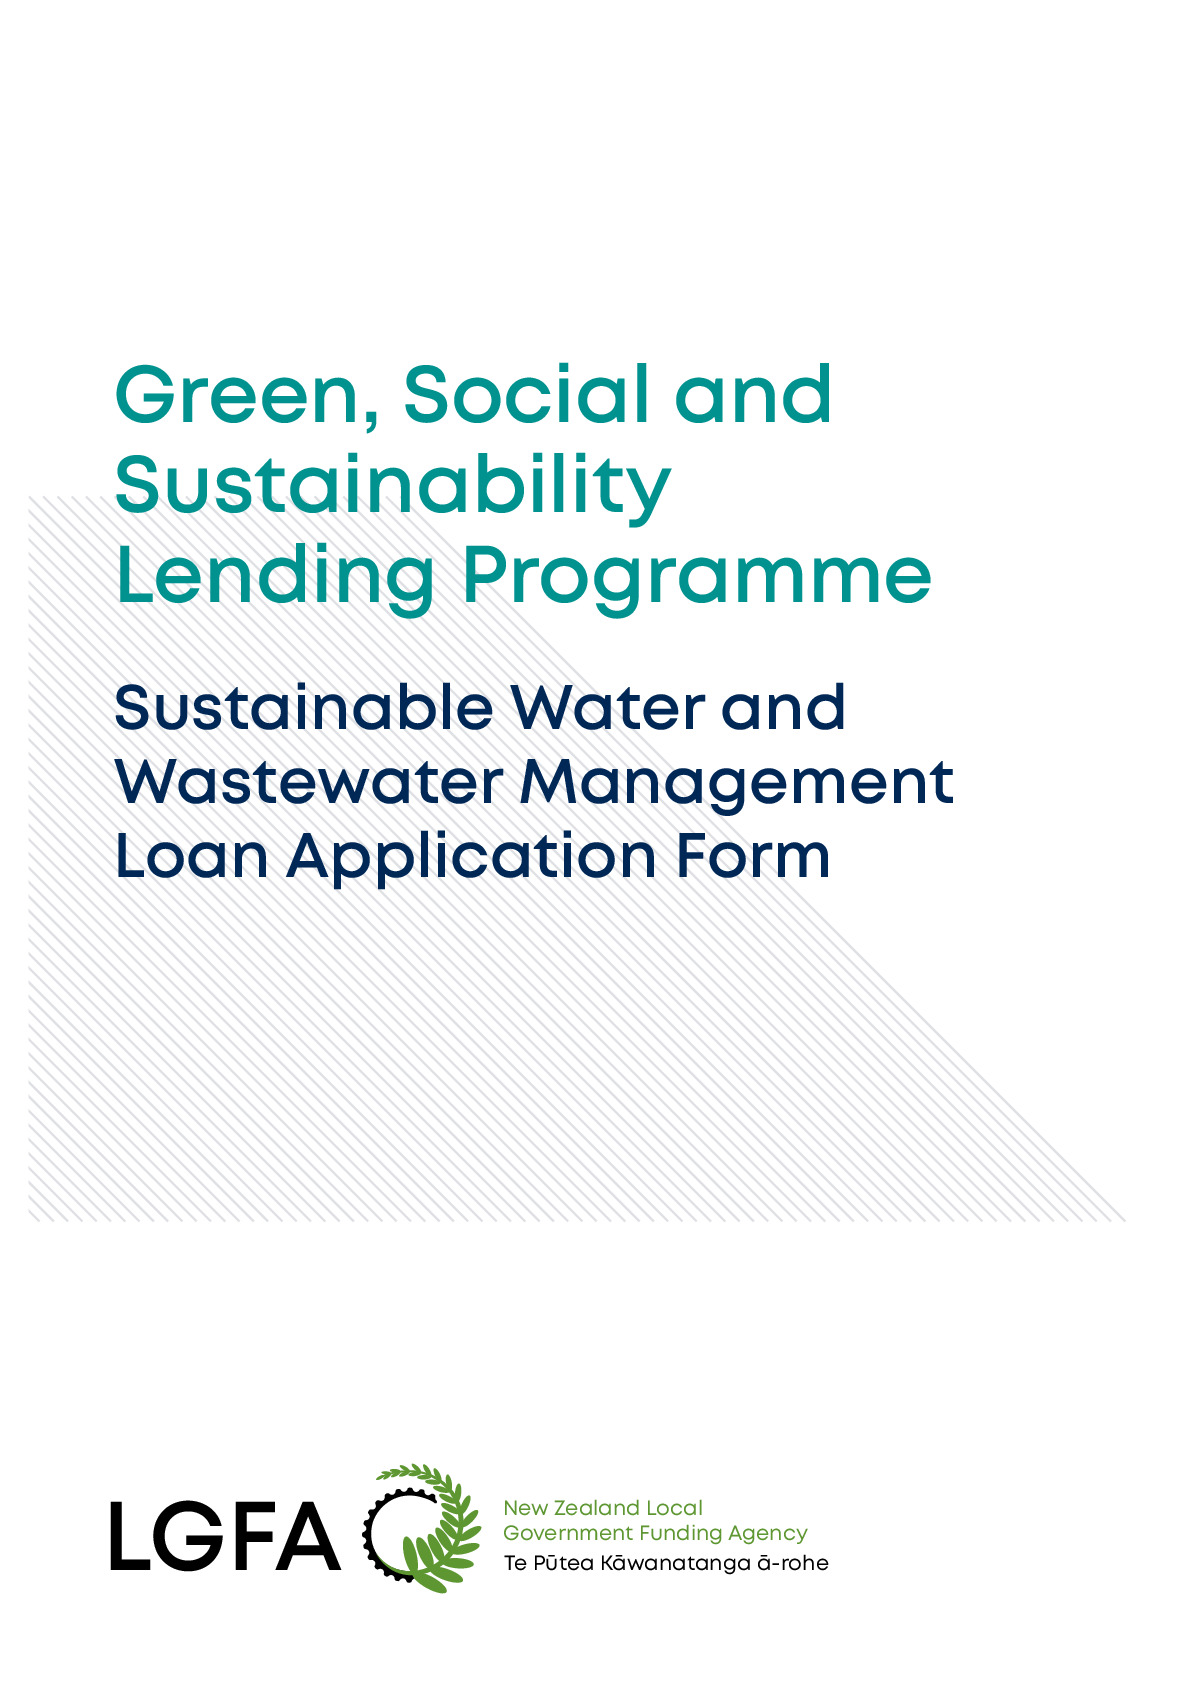 Sustainable Water and Wastewater Management Loan Appilication Form 30092021 FINAL